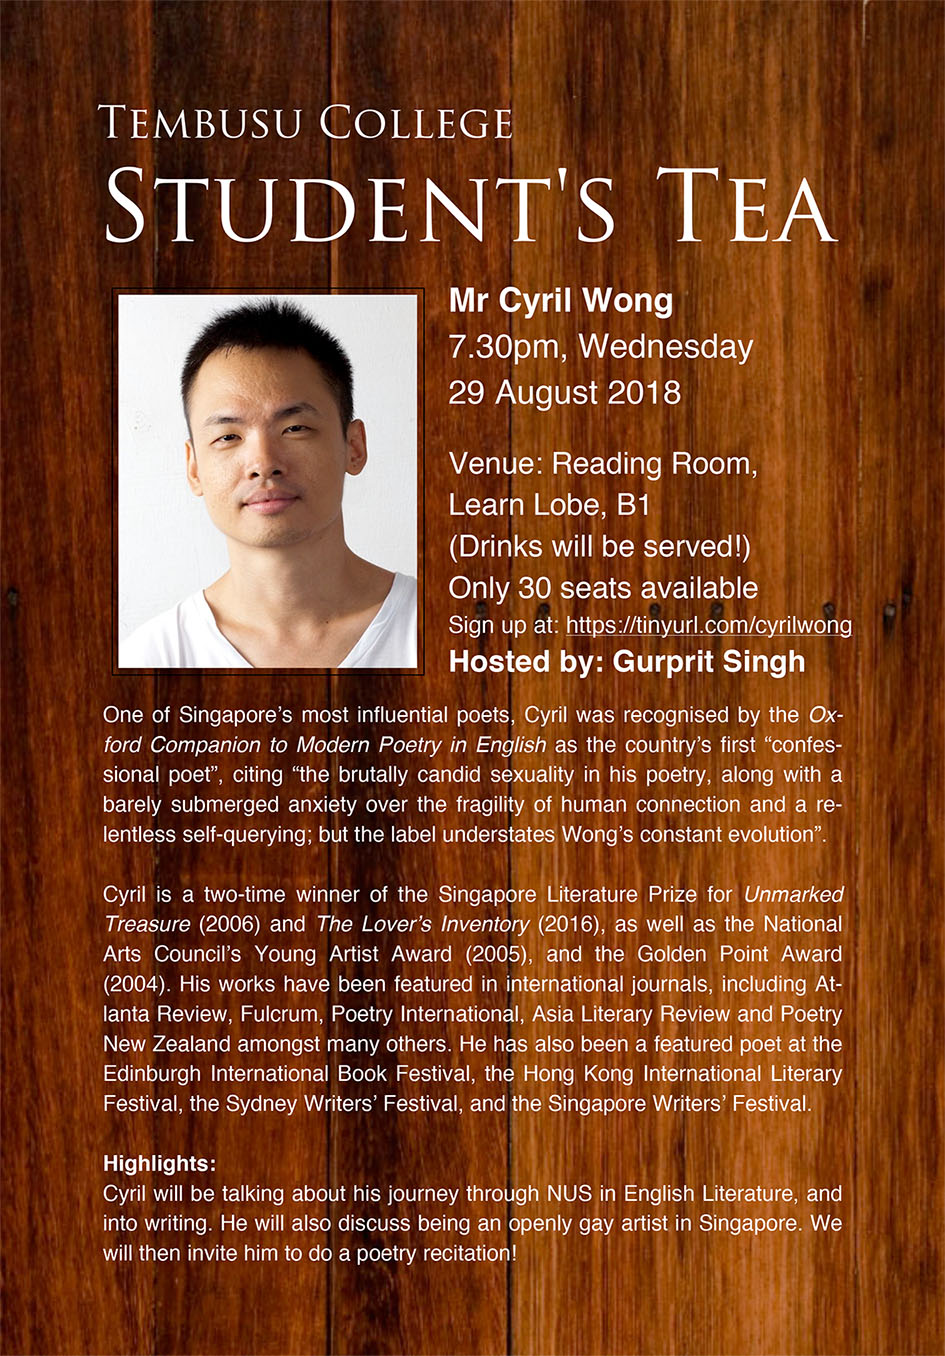 Microsoft Word - Student's Tea with Mr Cyril Wong.doc